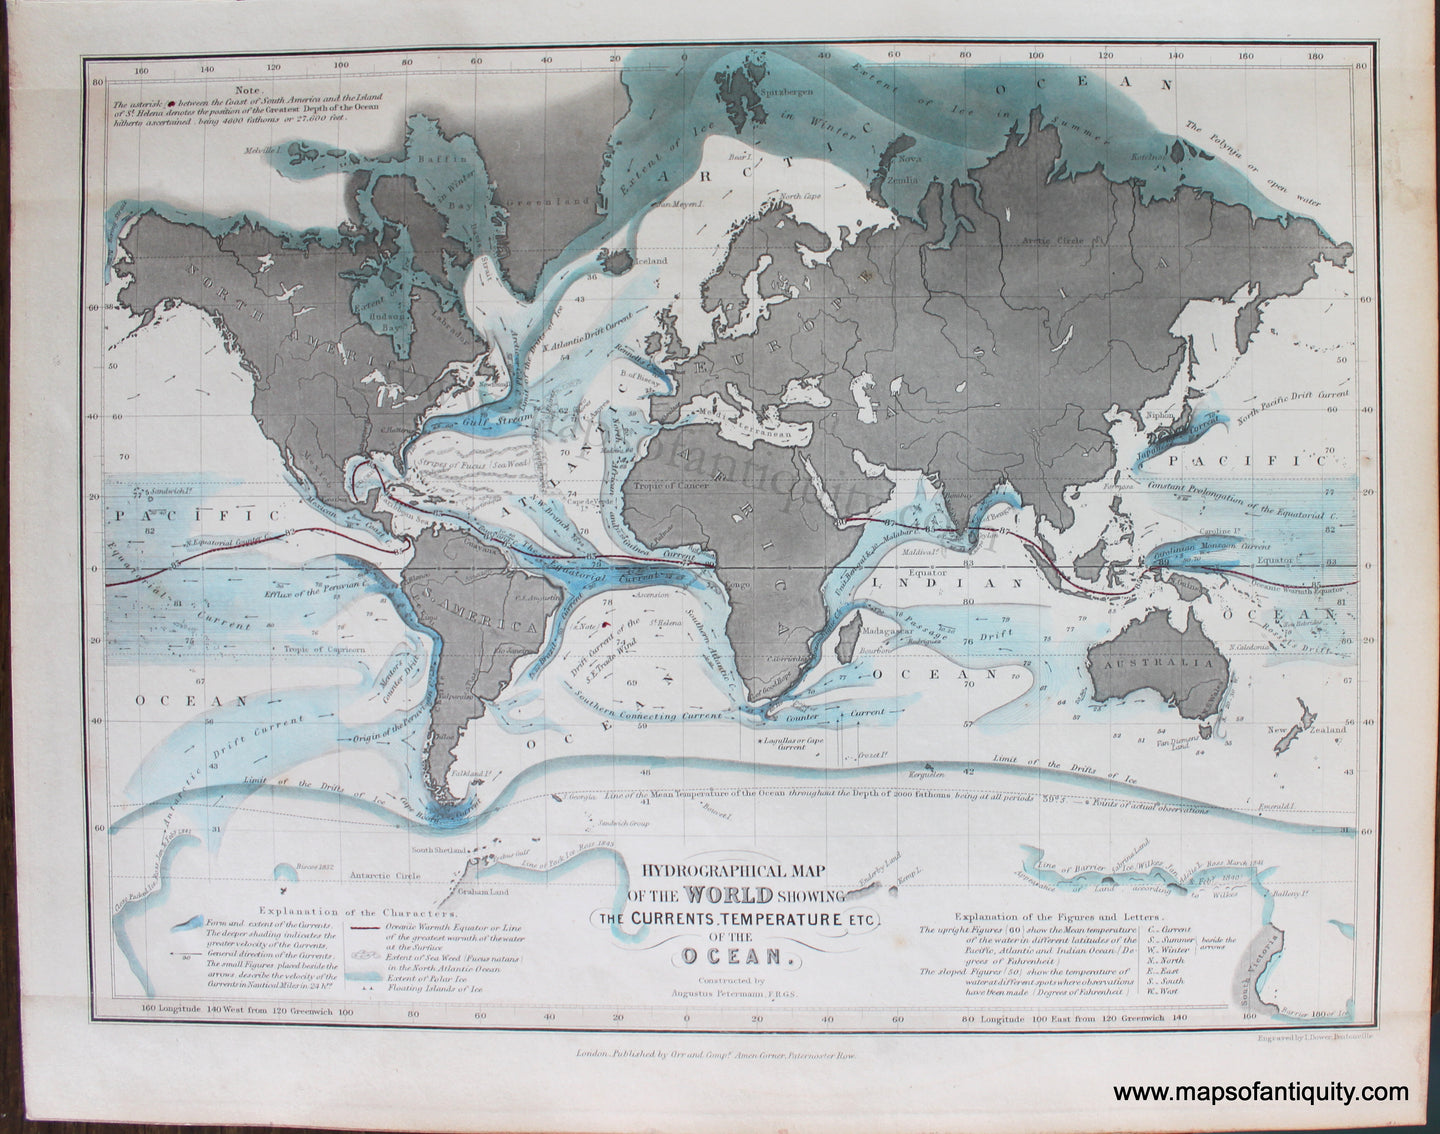 Genuine-Antique-Map-Hydrographical-Map-of-the-World-Showing-the-Currents-Temperature-etc.-of-the-Ocean.-World--1850-Petermann-/-Orr-/-Dower-Maps-Of-Antiquity-1800s-19th-century